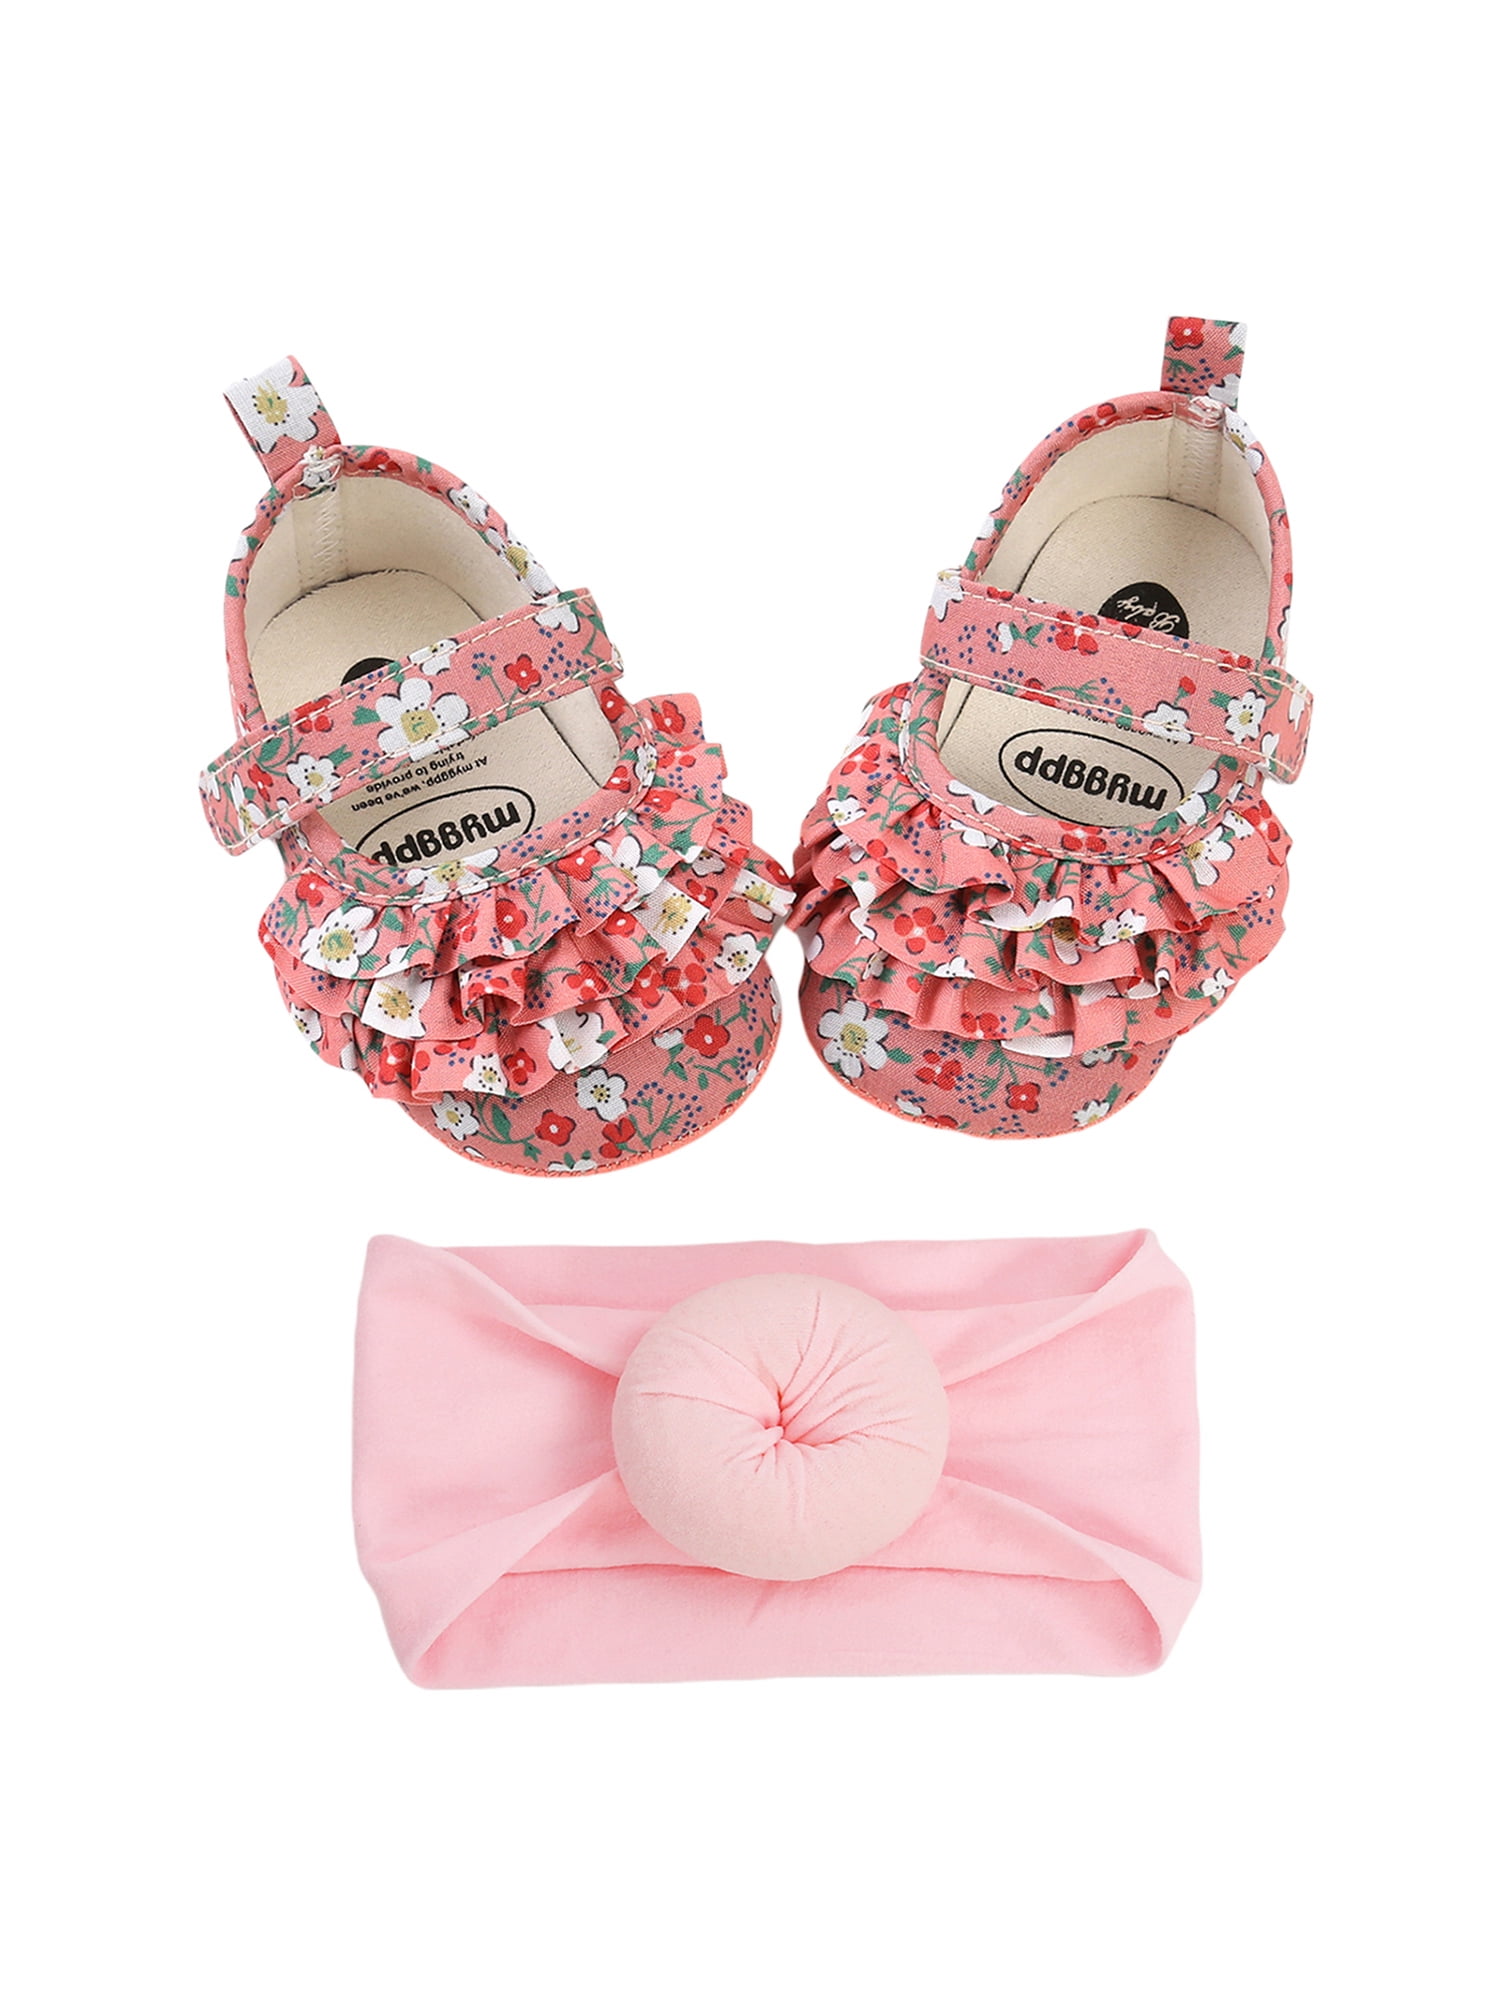 Toddler Infant Baby Girl Kid’s Shoes Flower Fashion Casual Soft Princess Shoes 